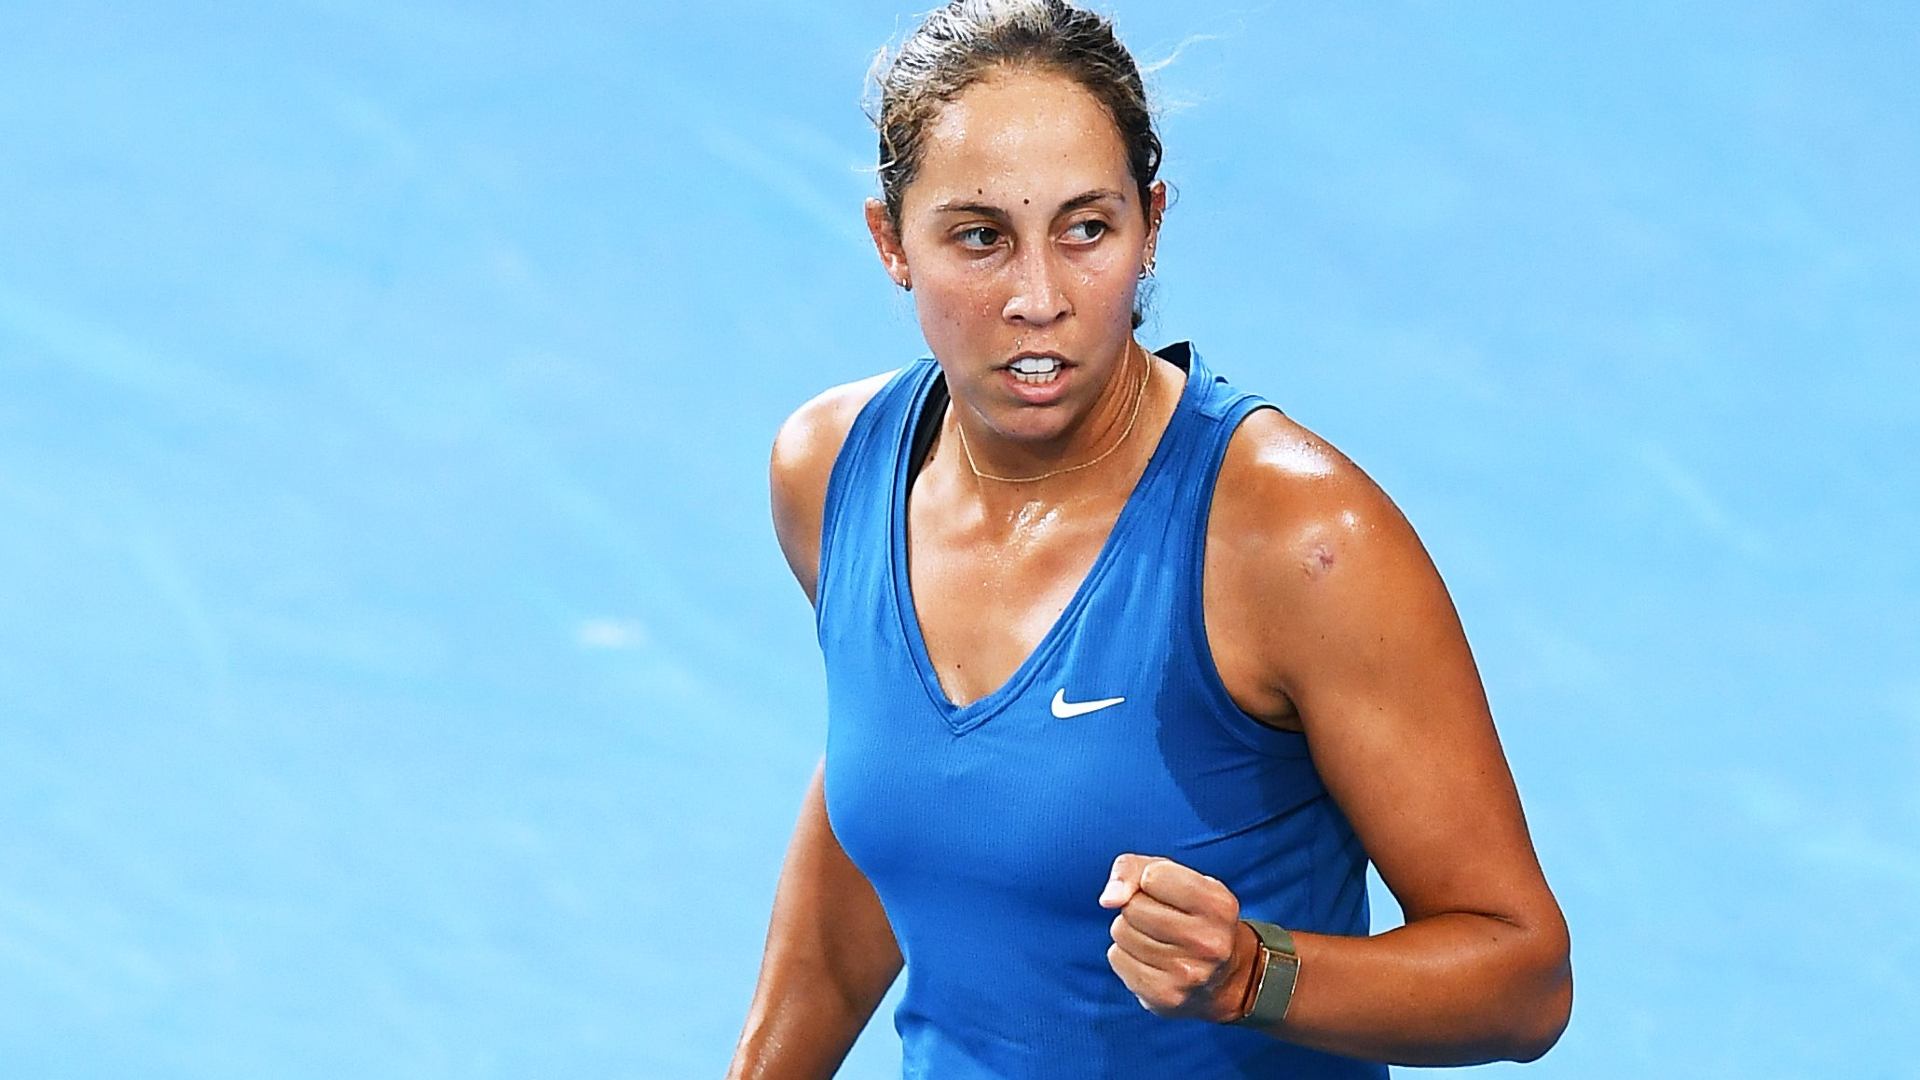 Madison Keys in a file photo (Image credits: Twitter)